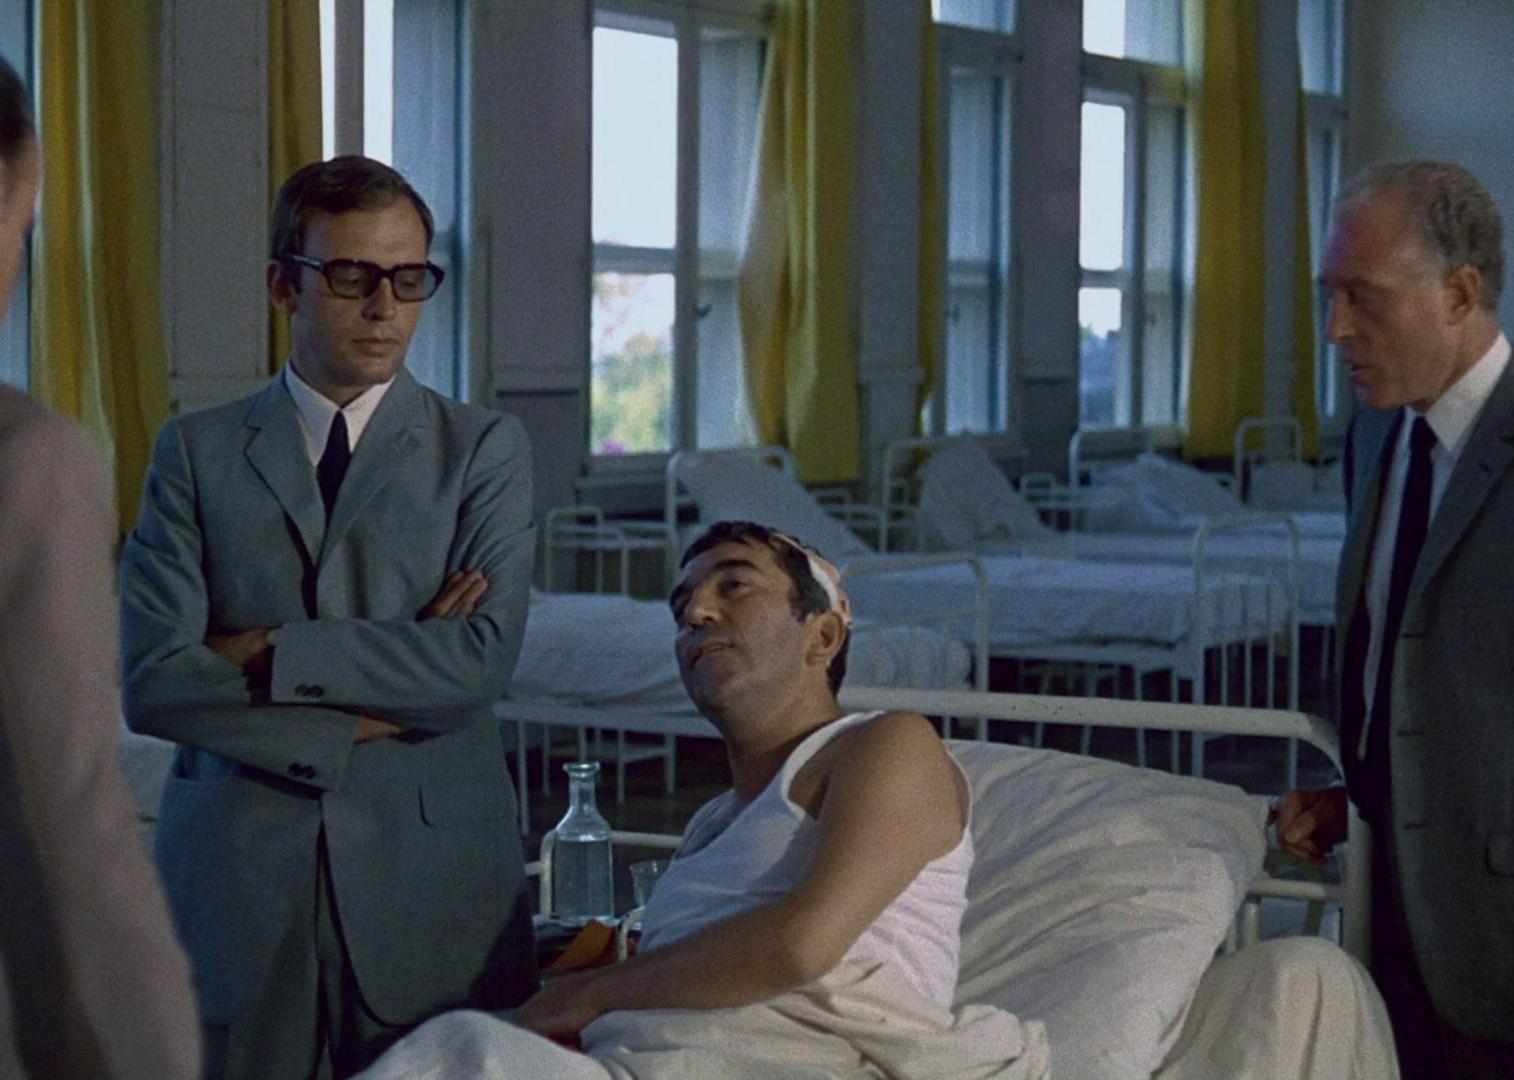 A man on a hospital bed surrounded by men in suits.